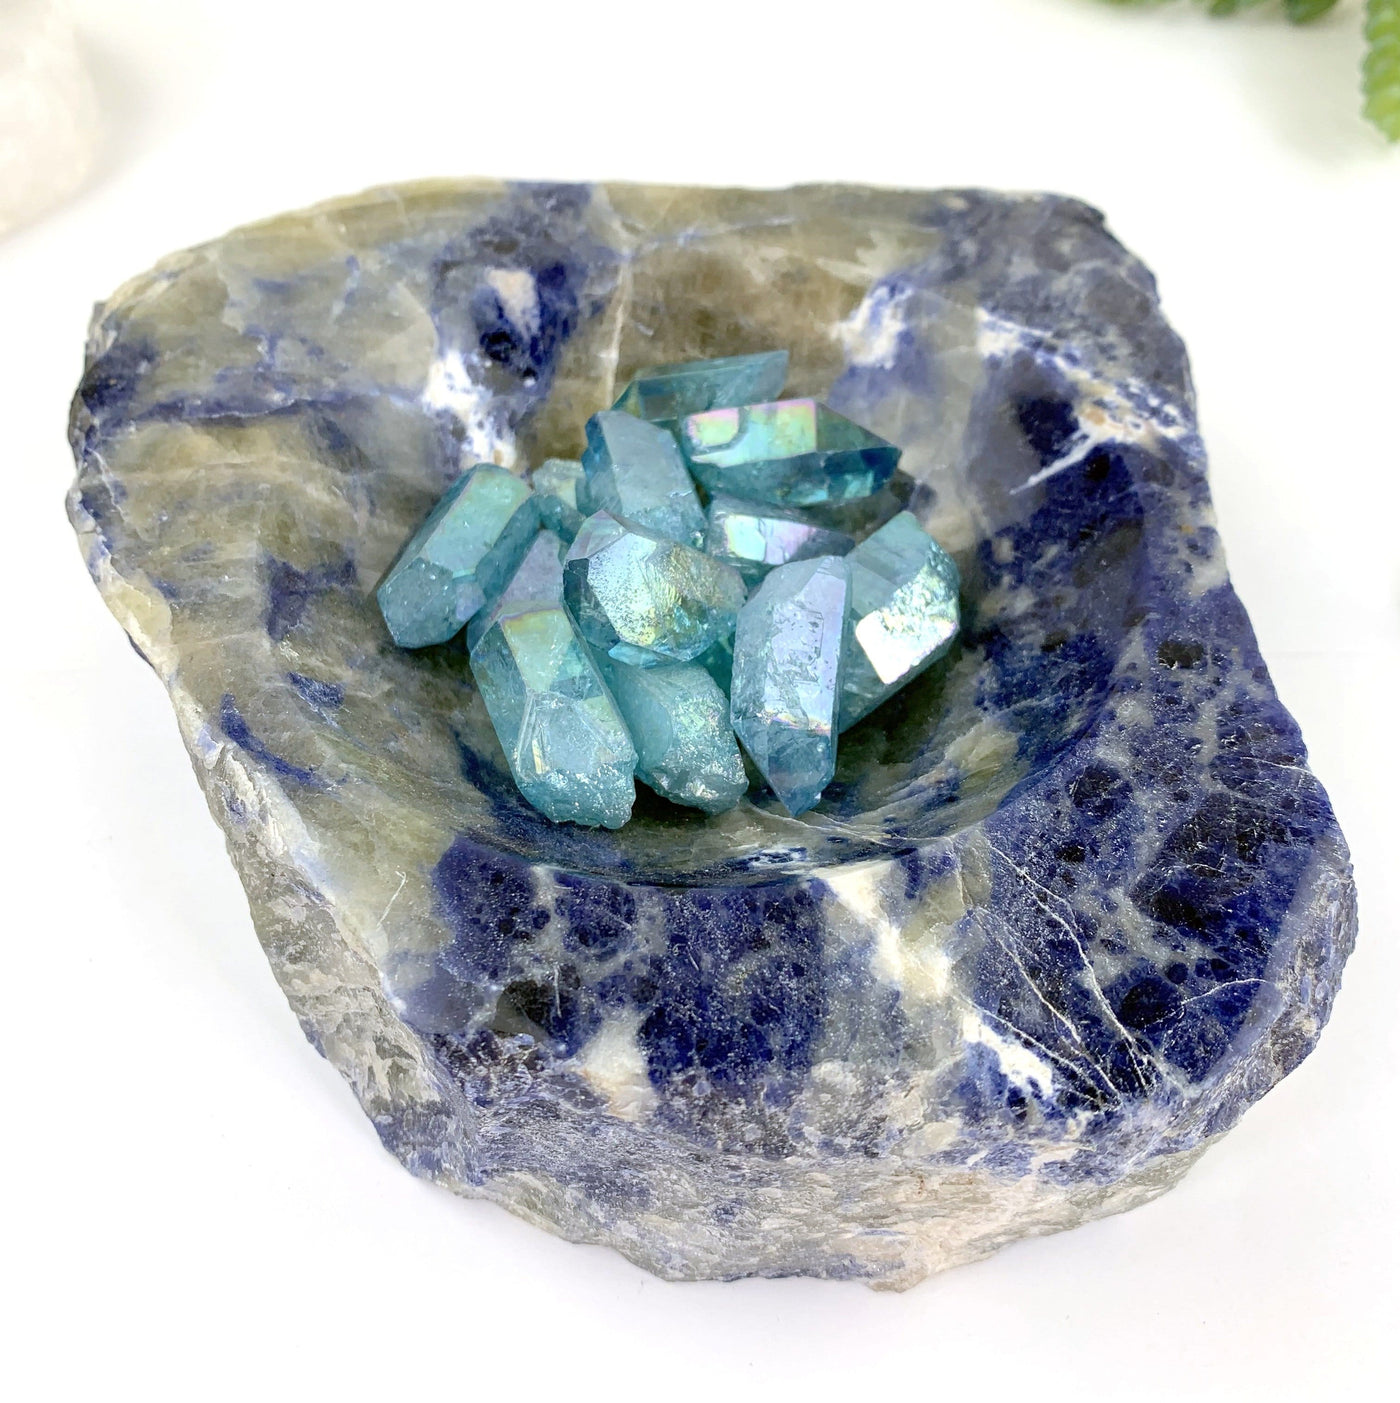 semi-polished sodalite bowl with stones inside (not included with purchase)